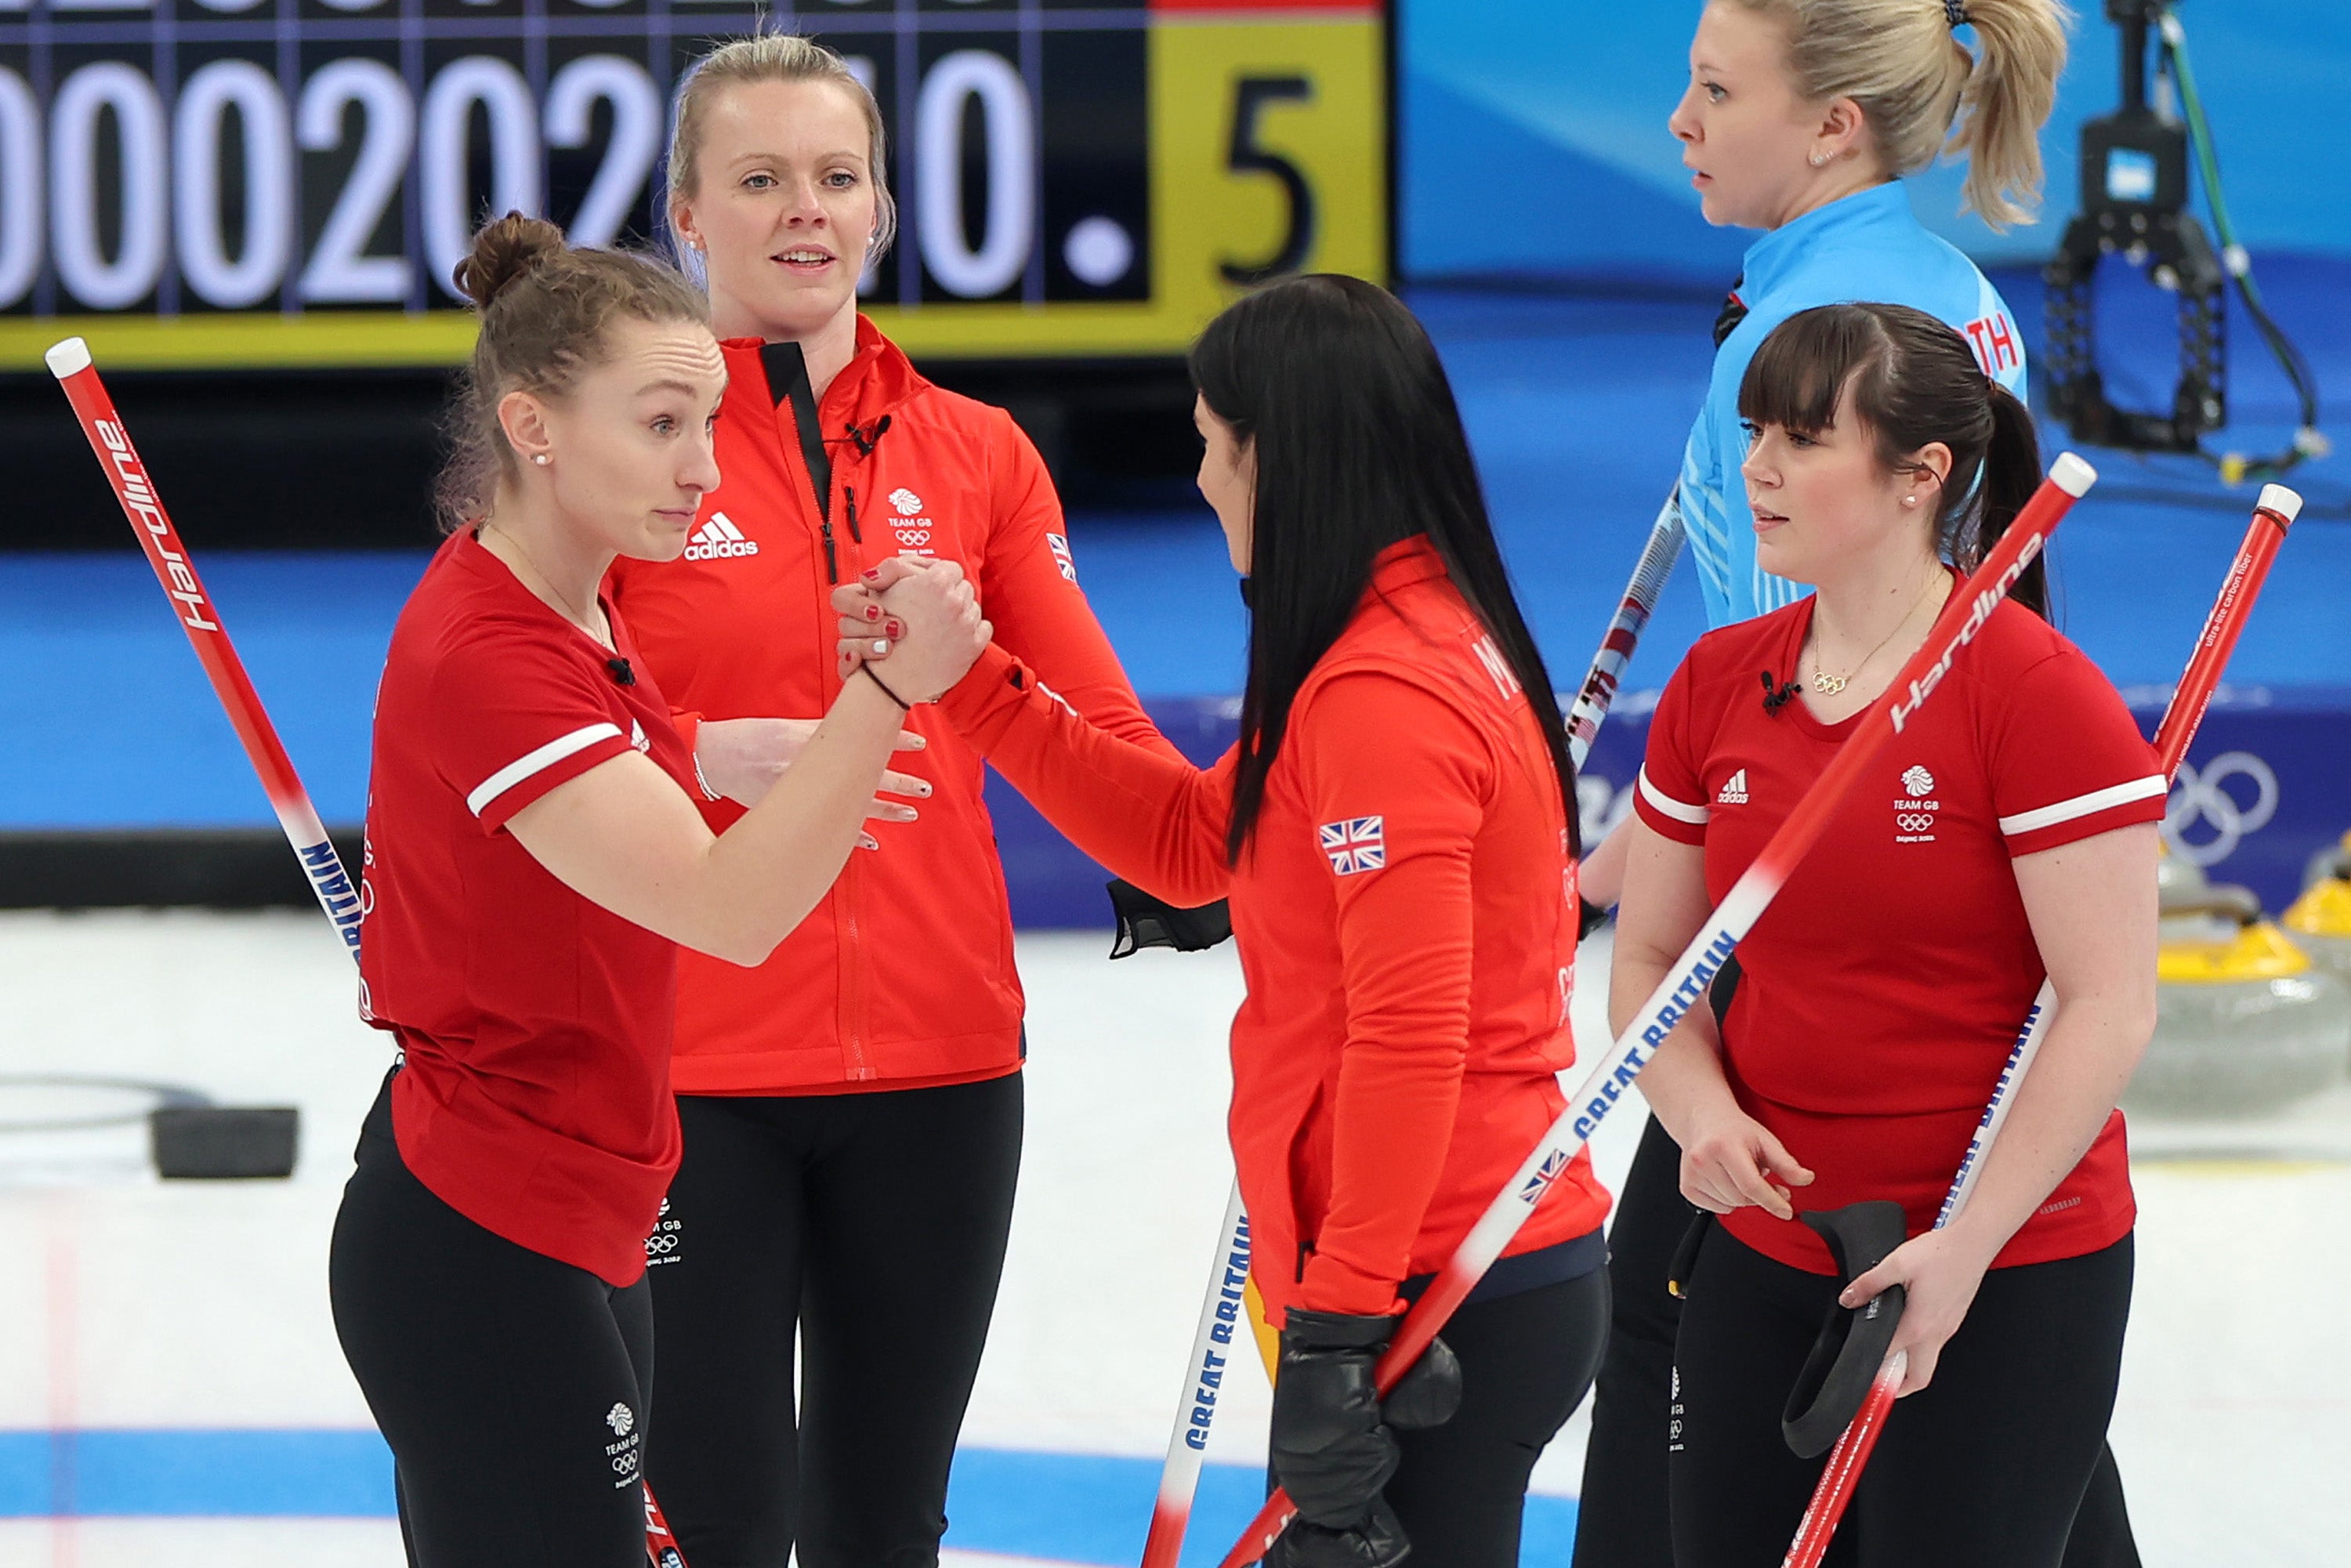 Winter Olympics Curling Live Eve Muirhead S Gb Women Defeat Usa In Crucial Round Robin Match Trending News More Latest News